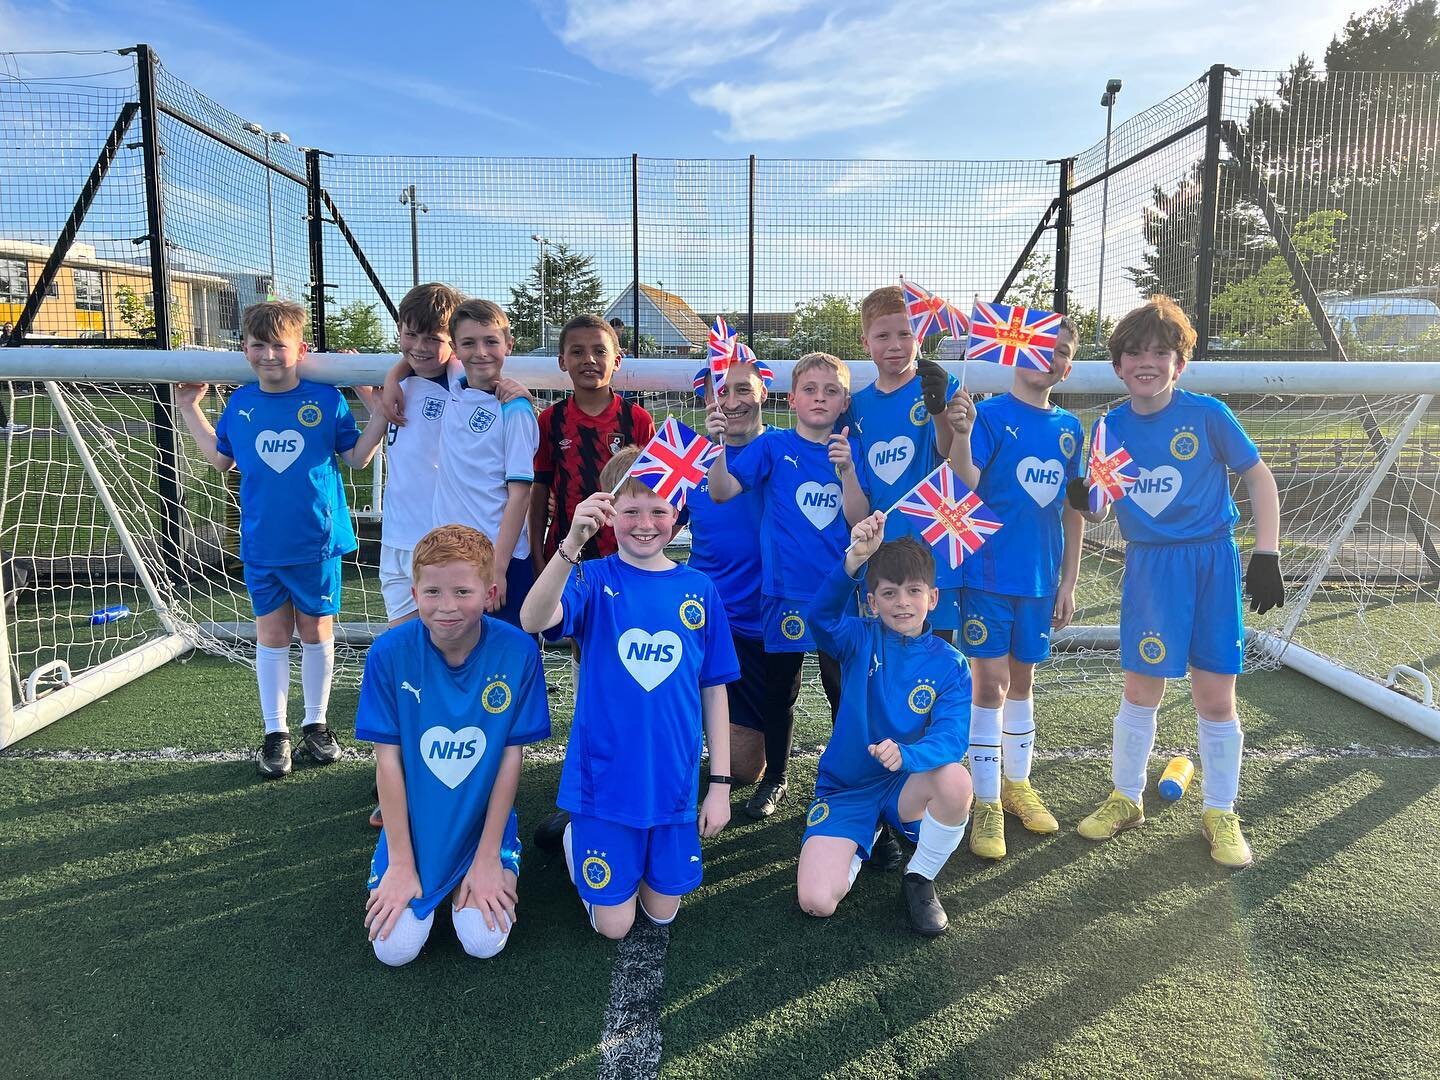 On the eve of the Coronation, our U10 Yellows wore red, white and blue to training in celebration of the Coronation of the King 🇬🇧⚽️

The fun filled session ended with birthday bumps and Haribo Starmix! 🤩

#risingstars #gorisers #grassrootsfootbal